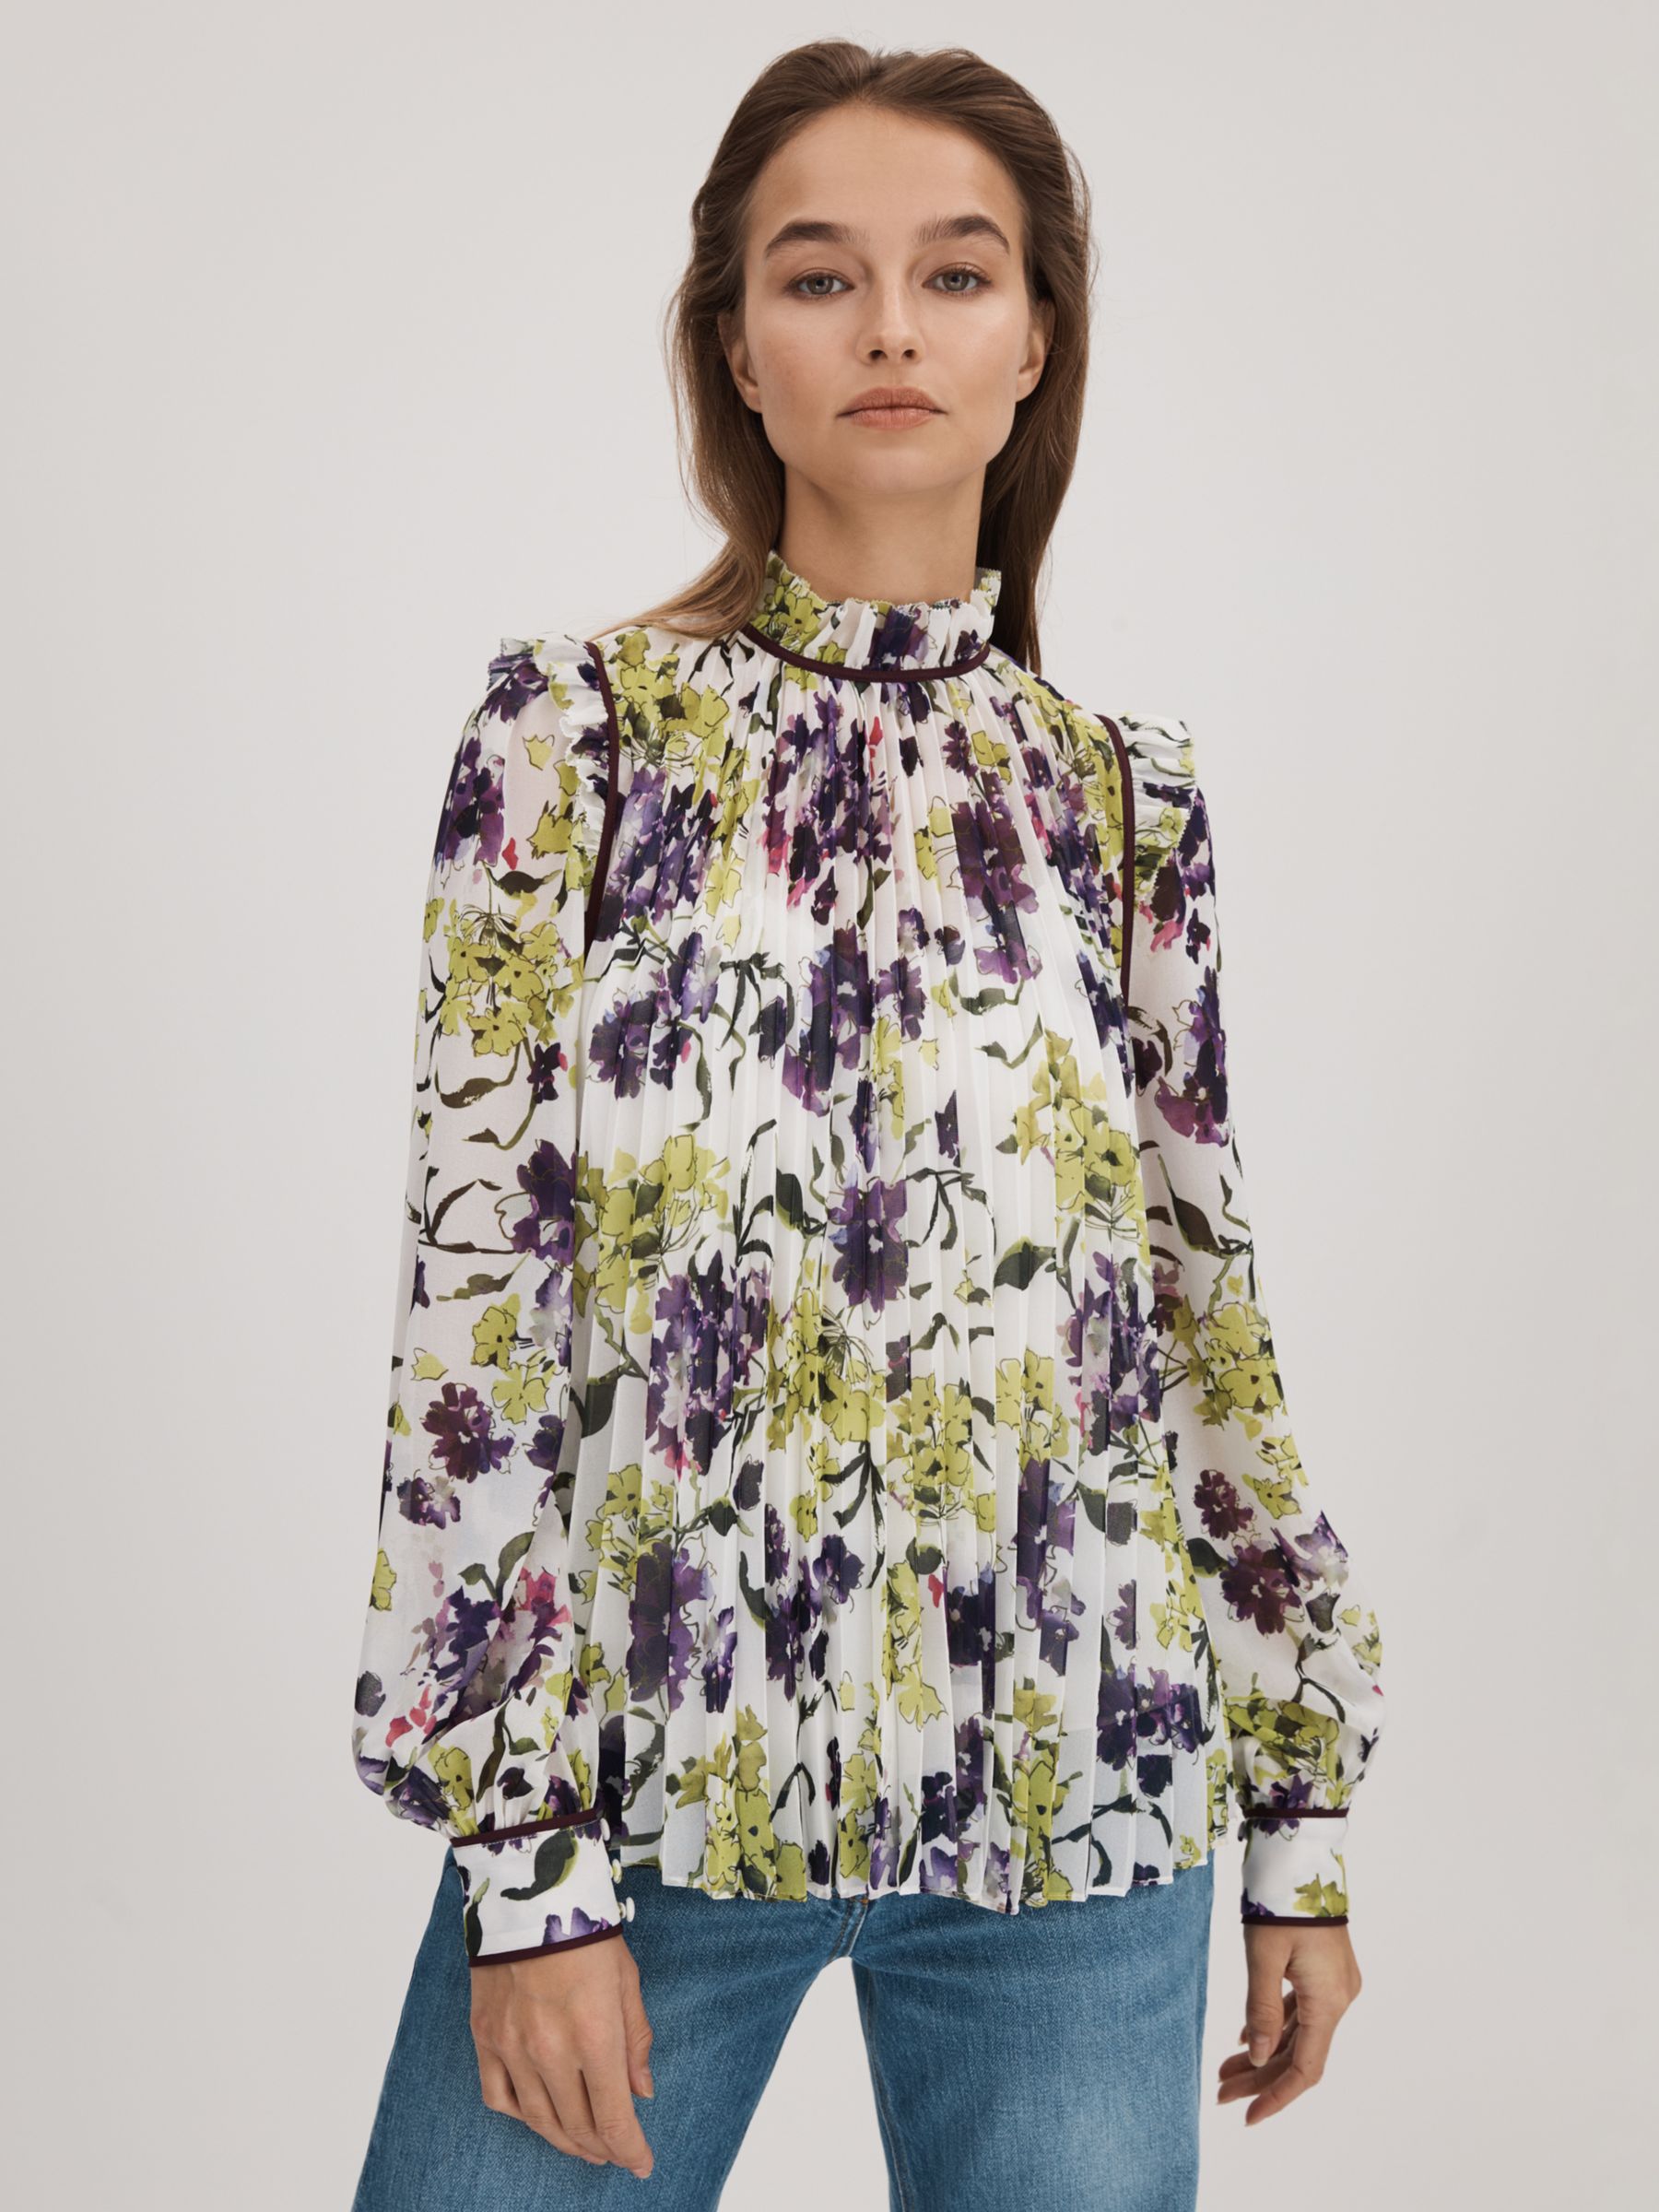 FLORERE Floral Print Pleated Blouse, Ivory/Multi at John Lewis & Partners